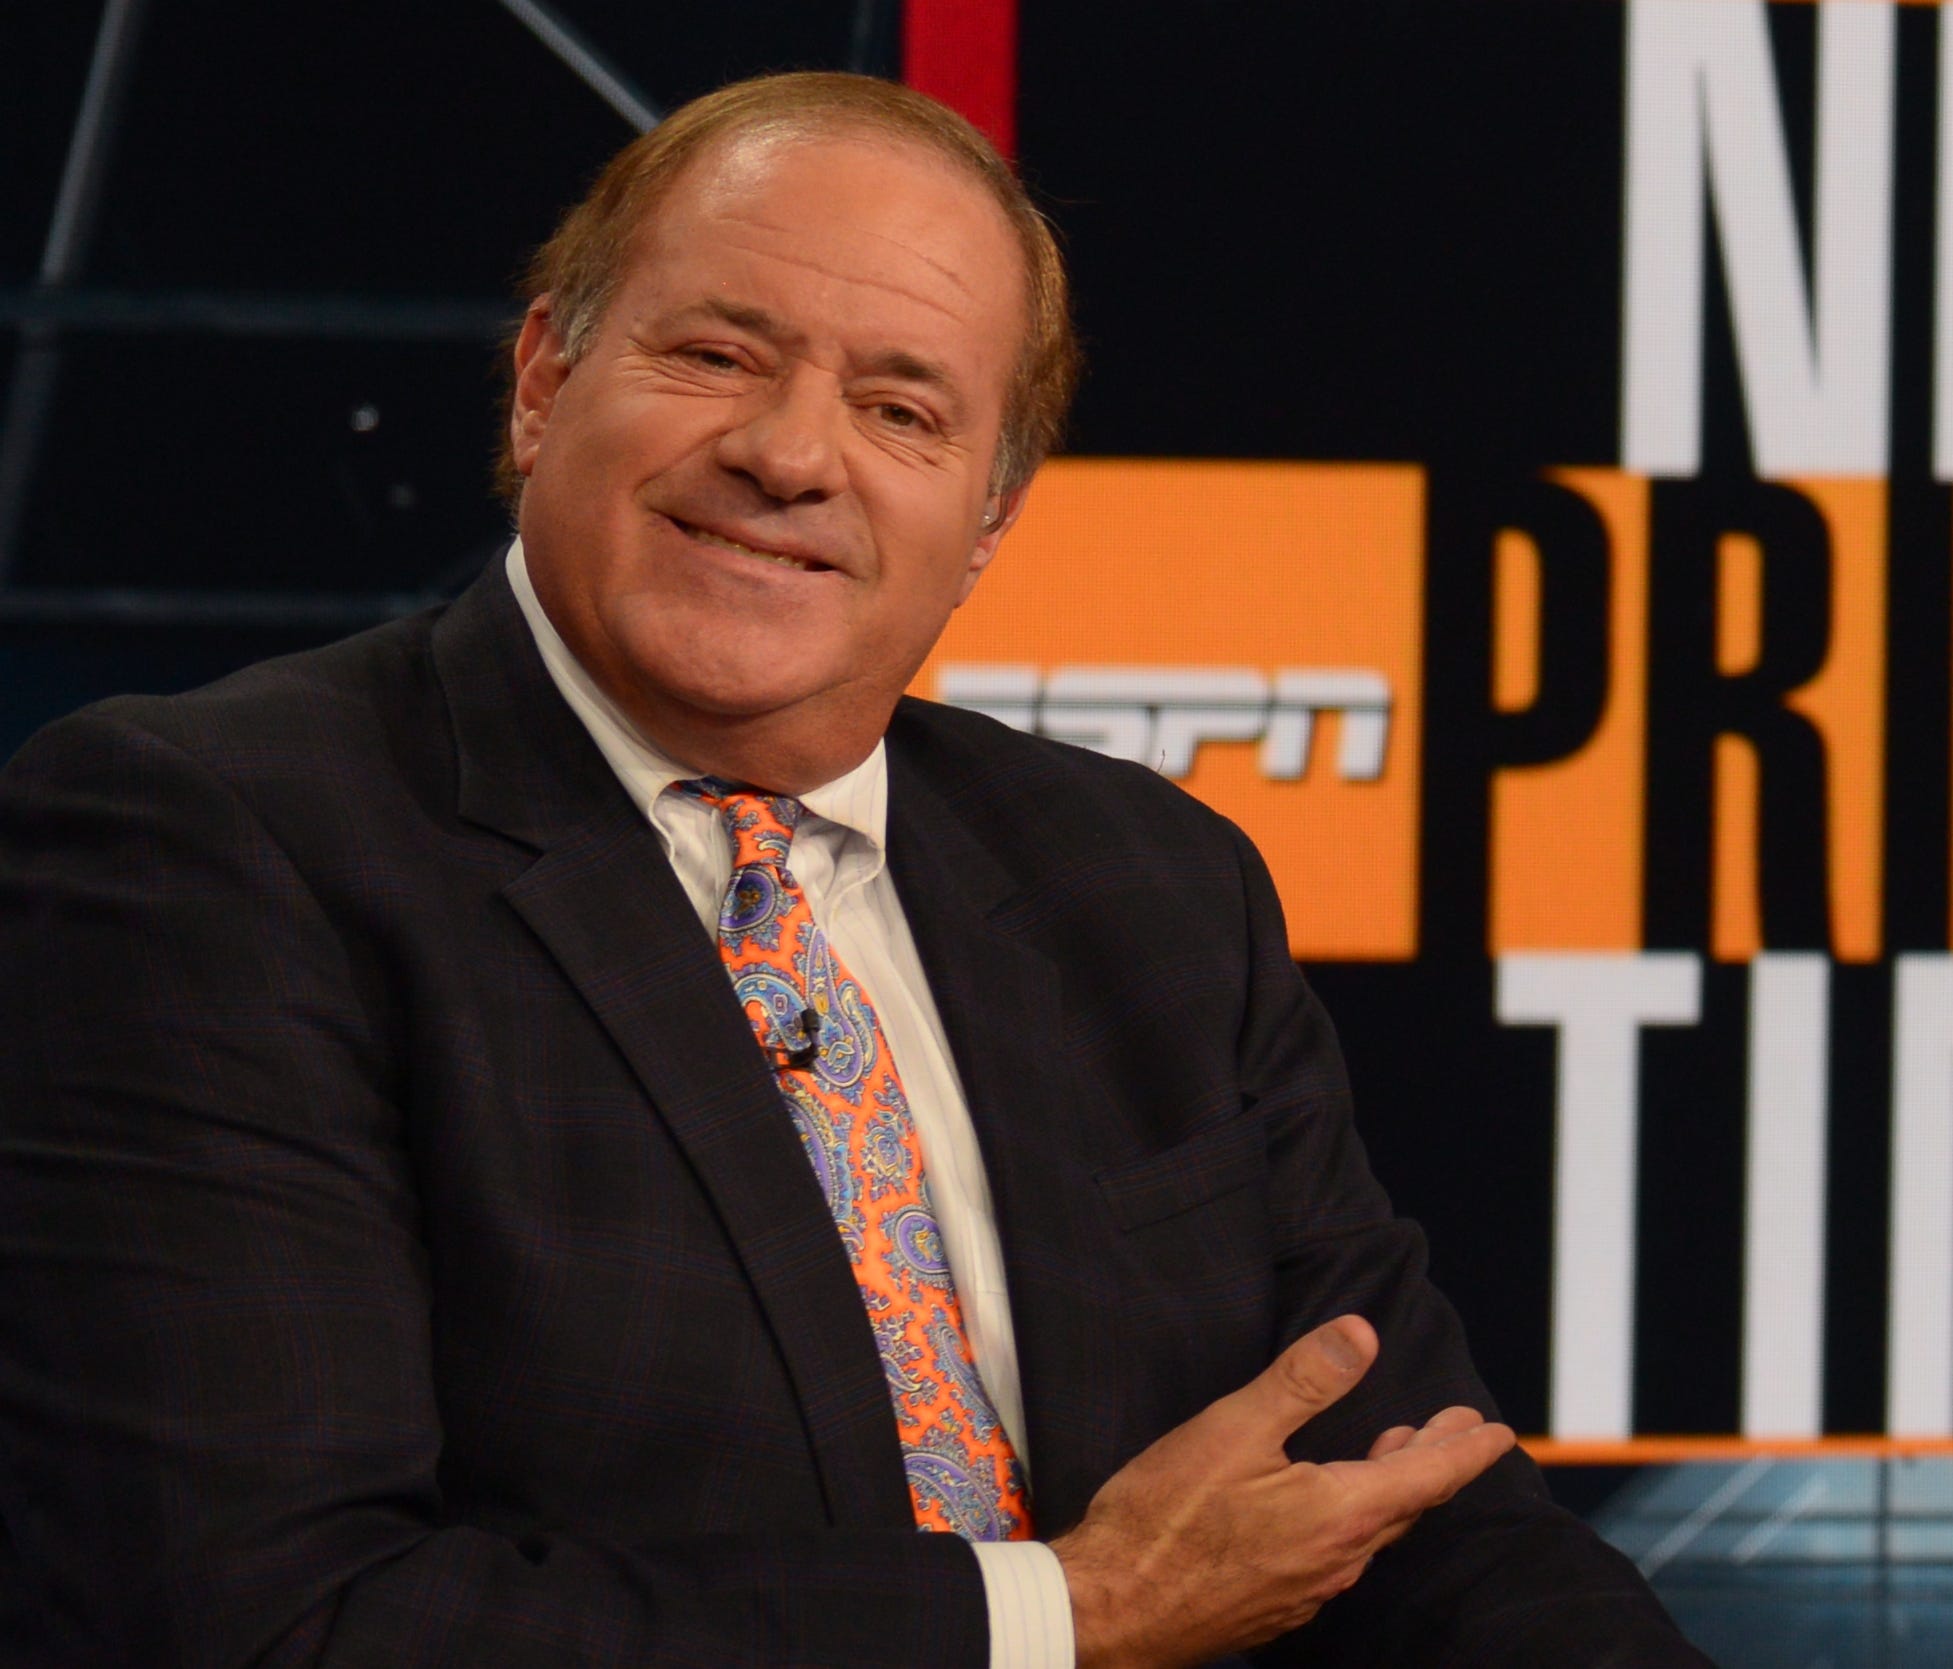 Chris Berman (left) hangs out in the ESPN studio in Bristol, Conn., with Tom Jackson in 2016.